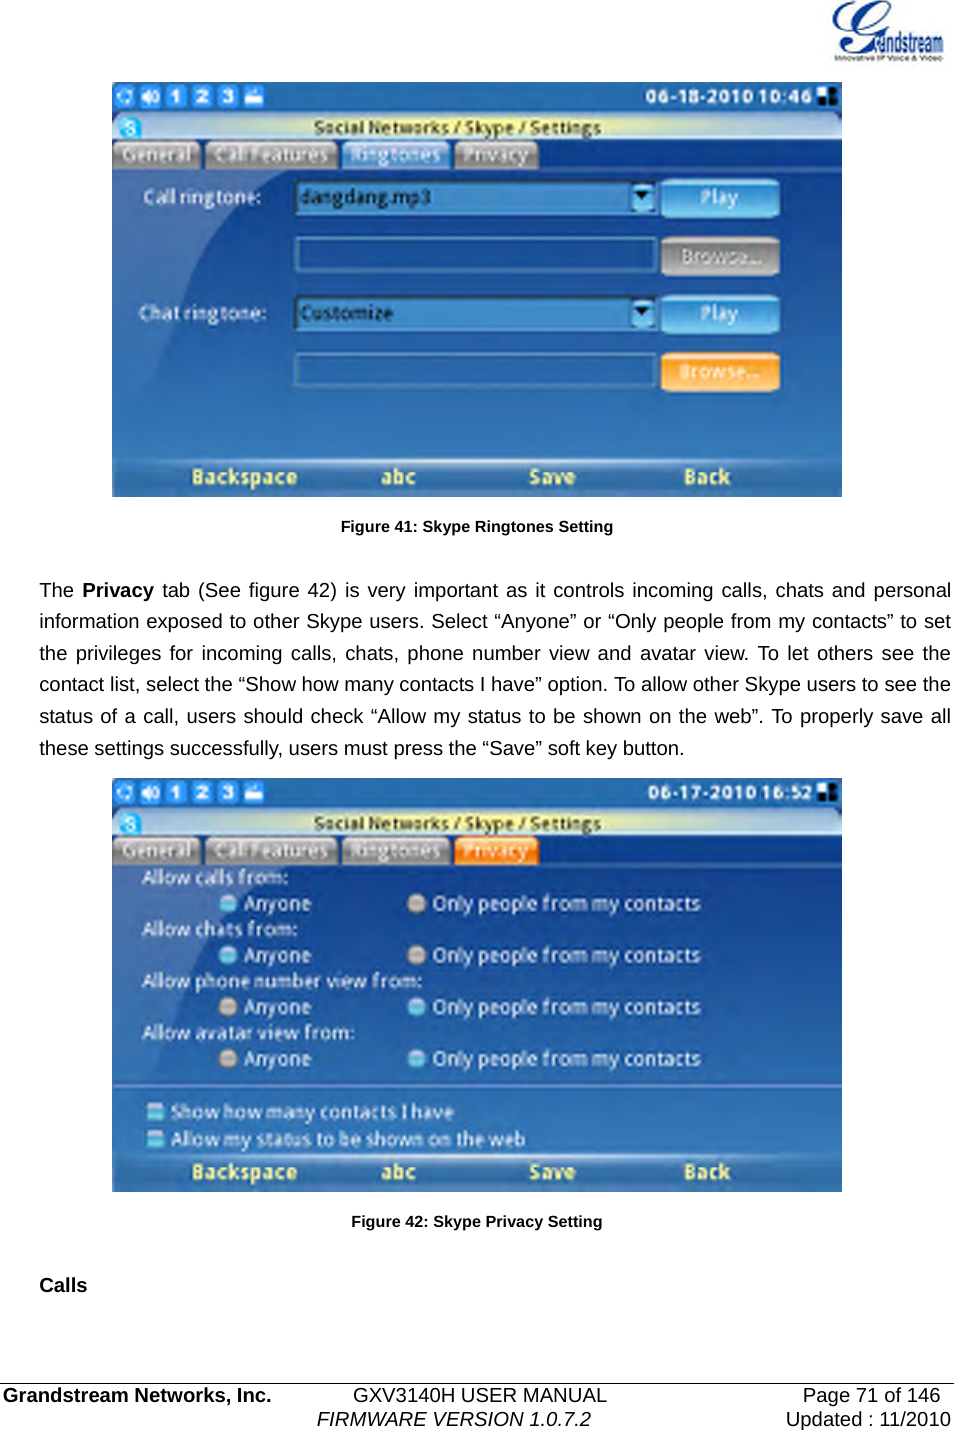   Grandstream Networks, Inc.        GXV3140H USER MANUAL                  Page 71 of 146                                FIRMWARE VERSION 1.0.7.2 Updated : 11/2010   Figure 41: Skype Ringtones Setting  The Privacy tab (See figure 42) is very important as it controls incoming calls, chats and personal information exposed to other Skype users. Select “Anyone” or “Only people from my contacts” to set the privileges for incoming calls, chats, phone number view and avatar view. To let others see the contact list, select the “Show how many contacts I have” option. To allow other Skype users to see the status of a call, users should check “Allow my status to be shown on the web”. To properly save all these settings successfully, users must press the “Save” soft key button.    Figure 42: Skype Privacy Setting  Calls  